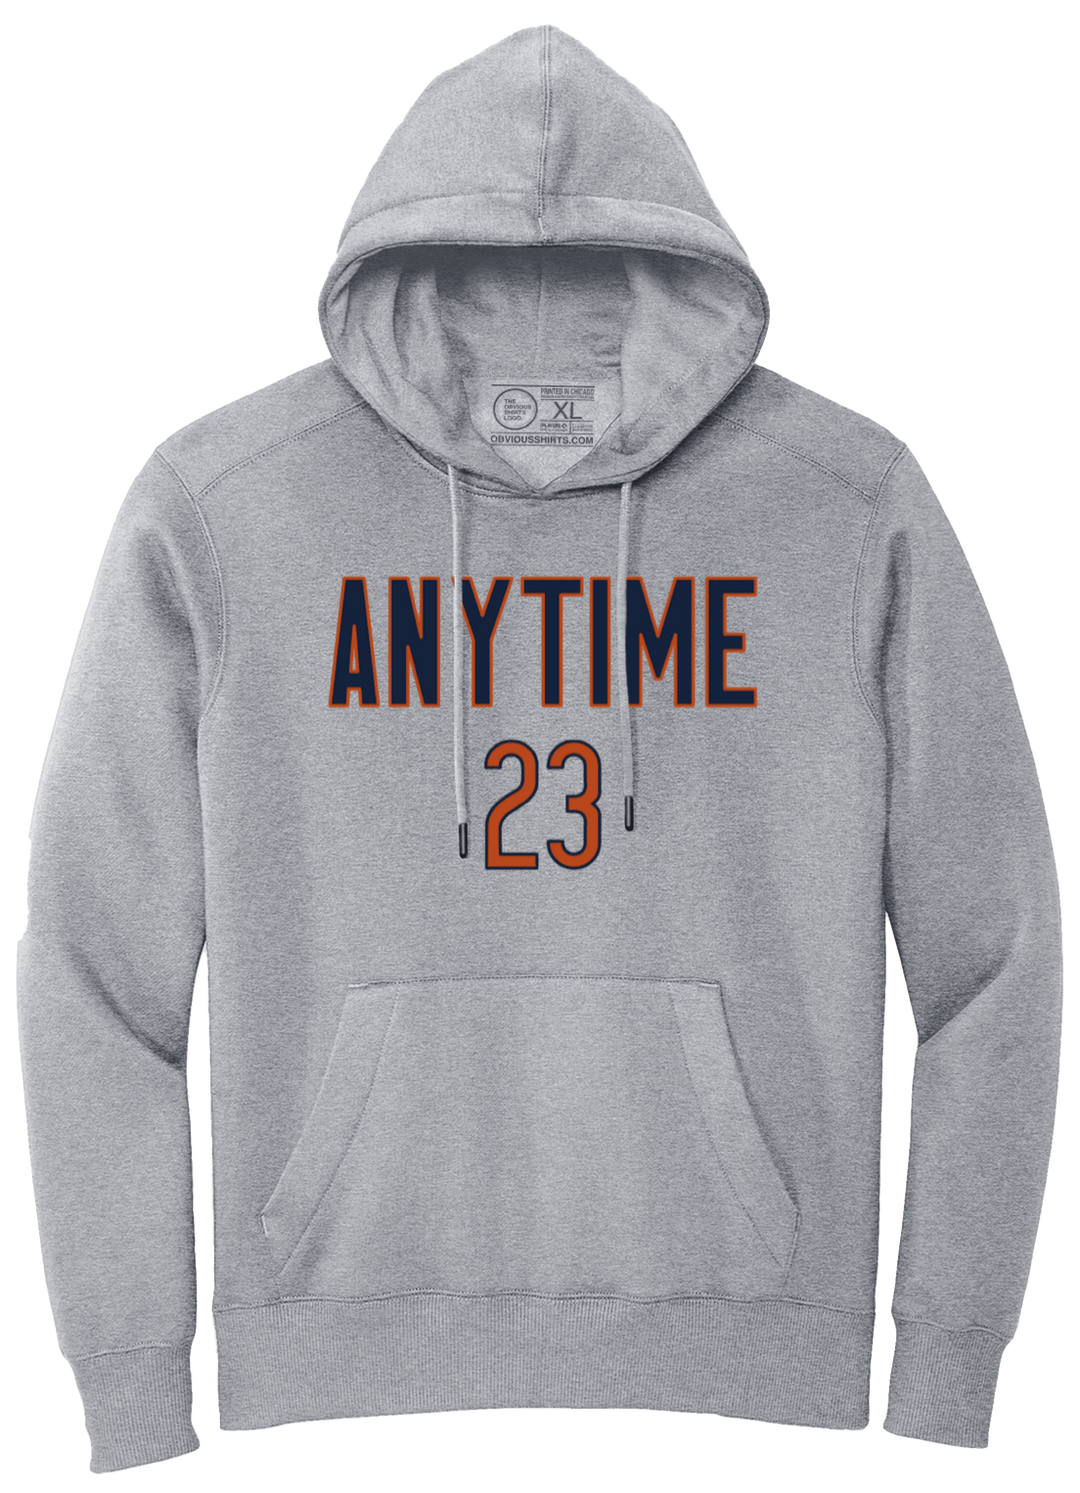 ANYTIME 23 (HOODED SWEATSHIRT) - OBVIOUS SHIRTS